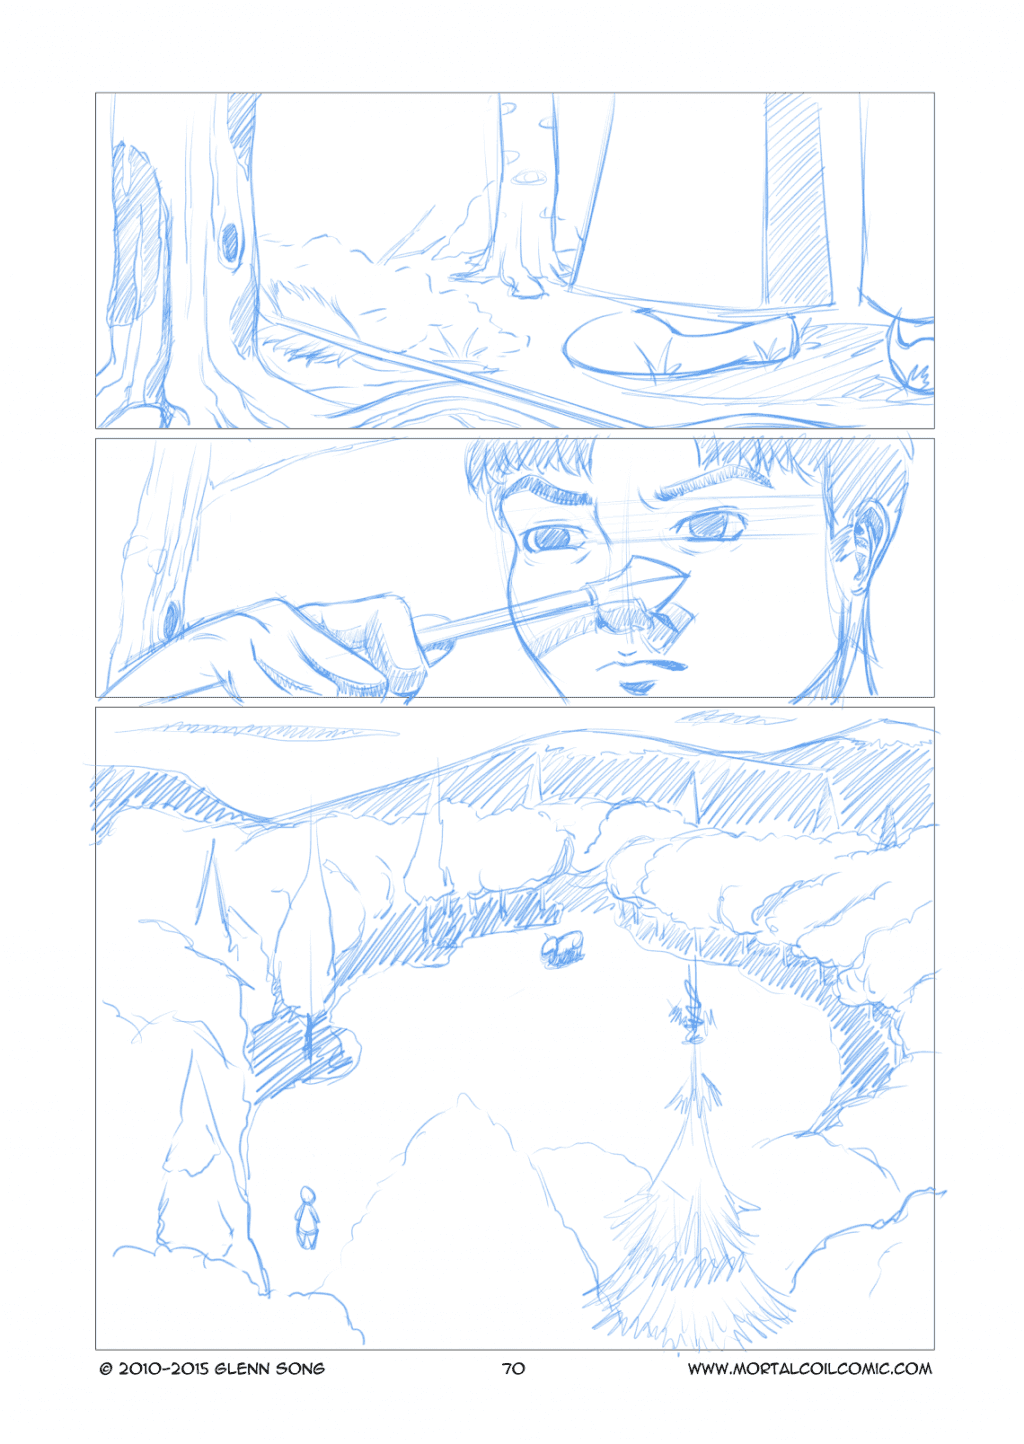 Archer of the West - 1 Pencils 